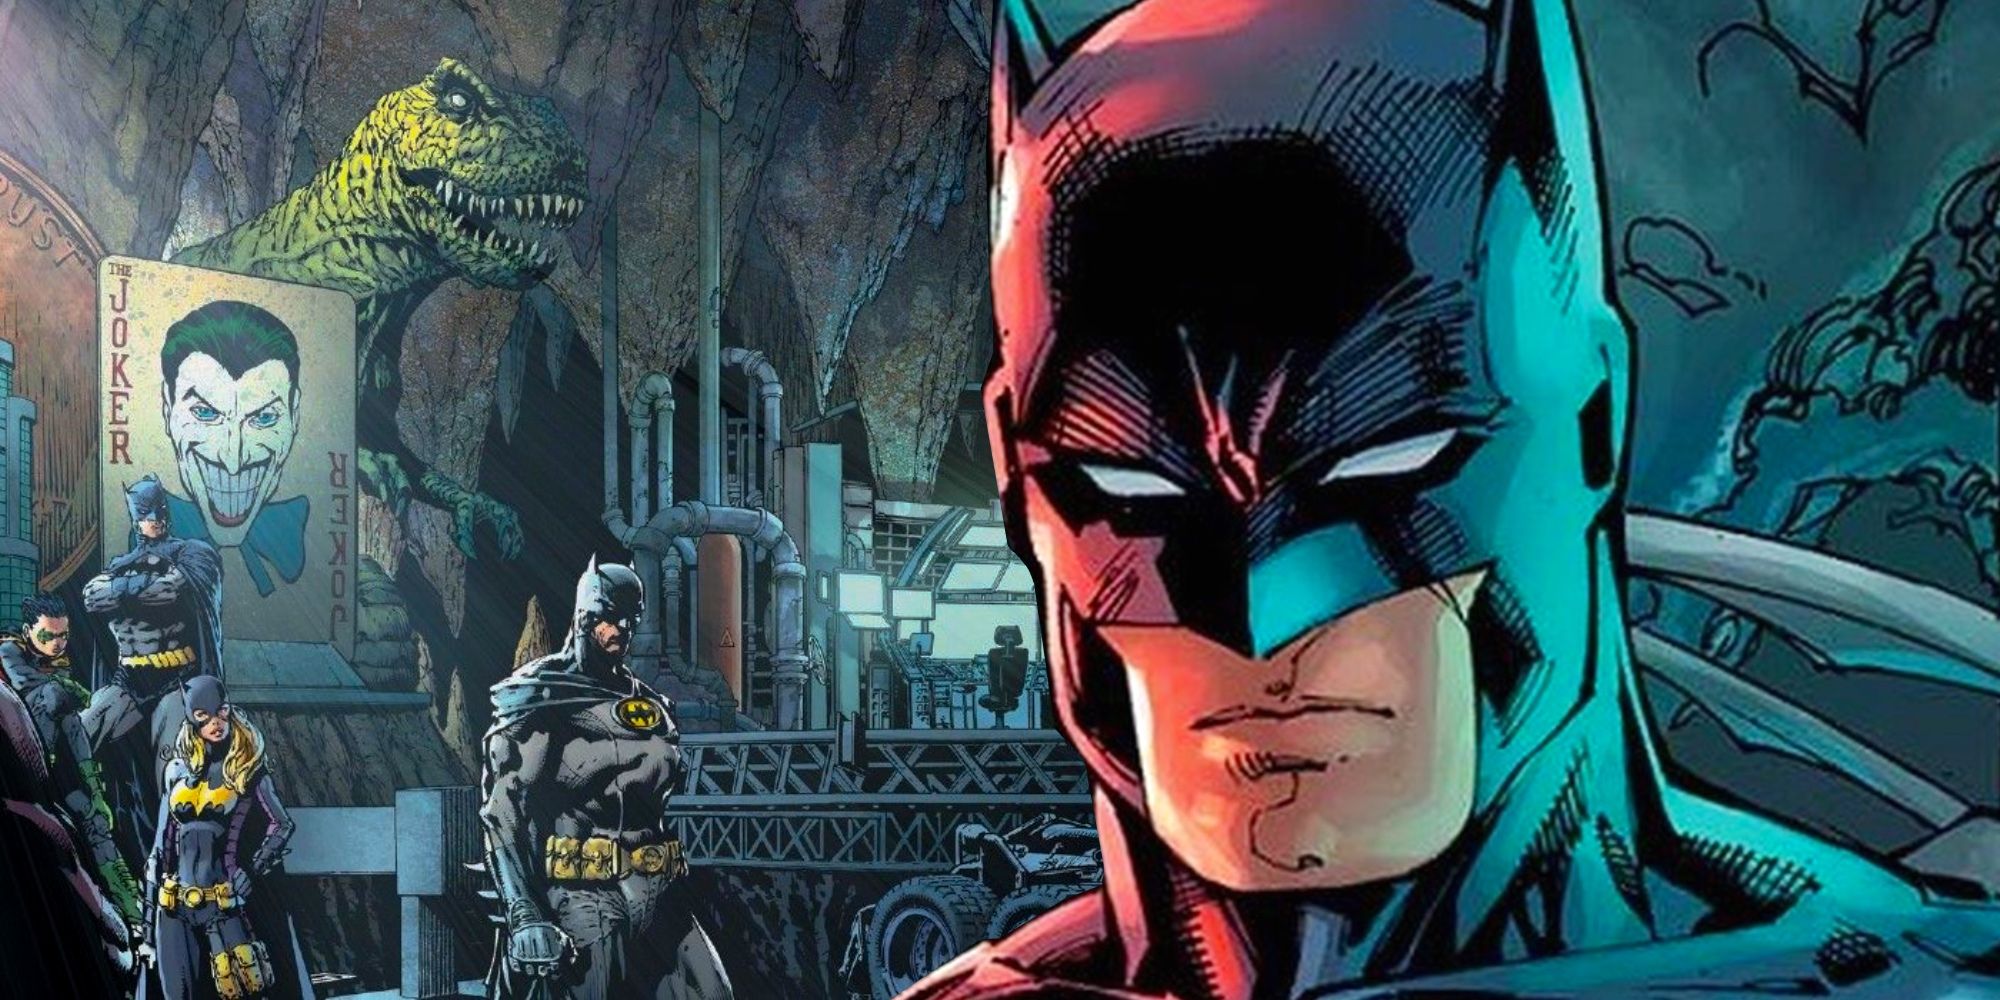 Batman Doesn't Actually Deserve Credit for the Batcave